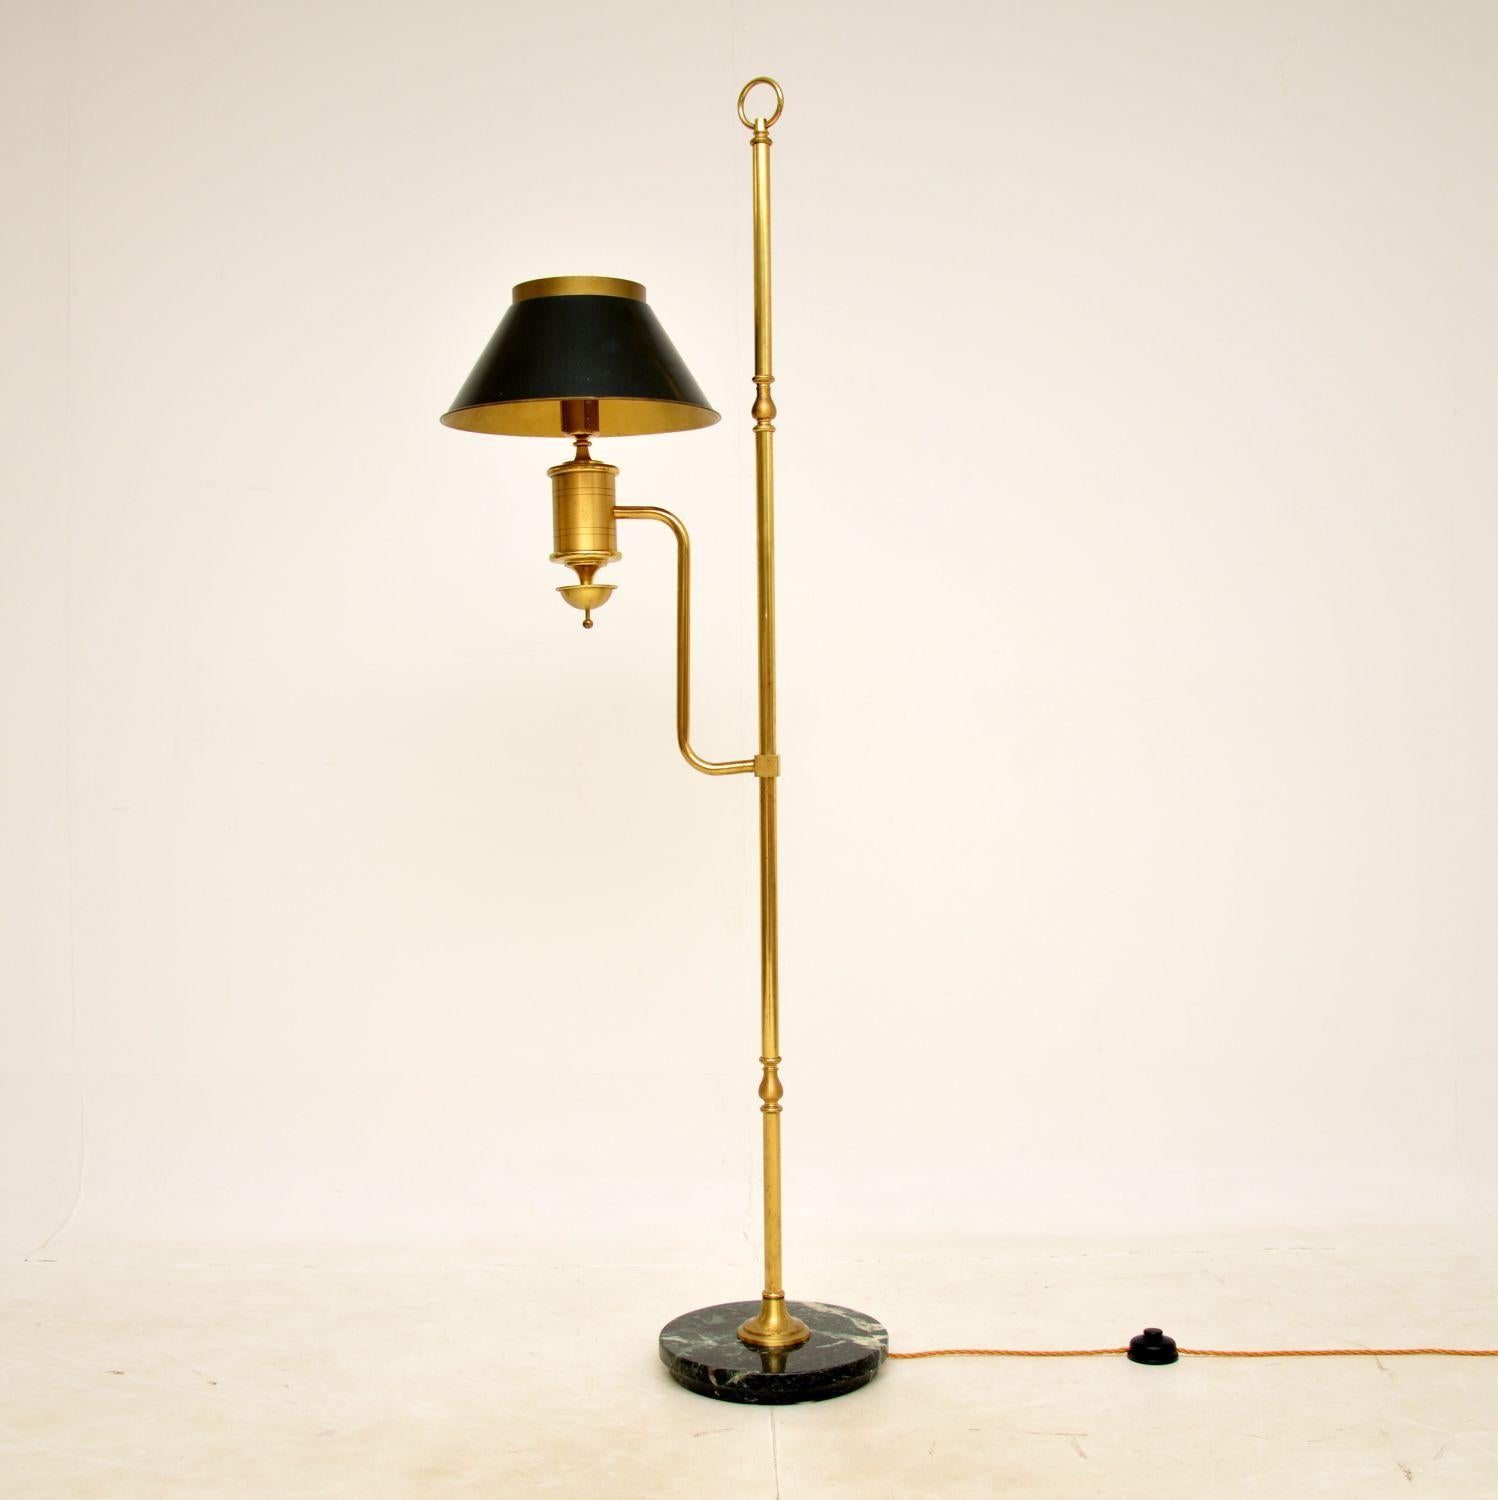 A fantastic vintage brass & marble floor lamp in solid brass and marble, this was made in England and dates from around the 1930-50’s.

It is of superb quality, with stunning green marble base and a gorgeous design. The removable shade is green